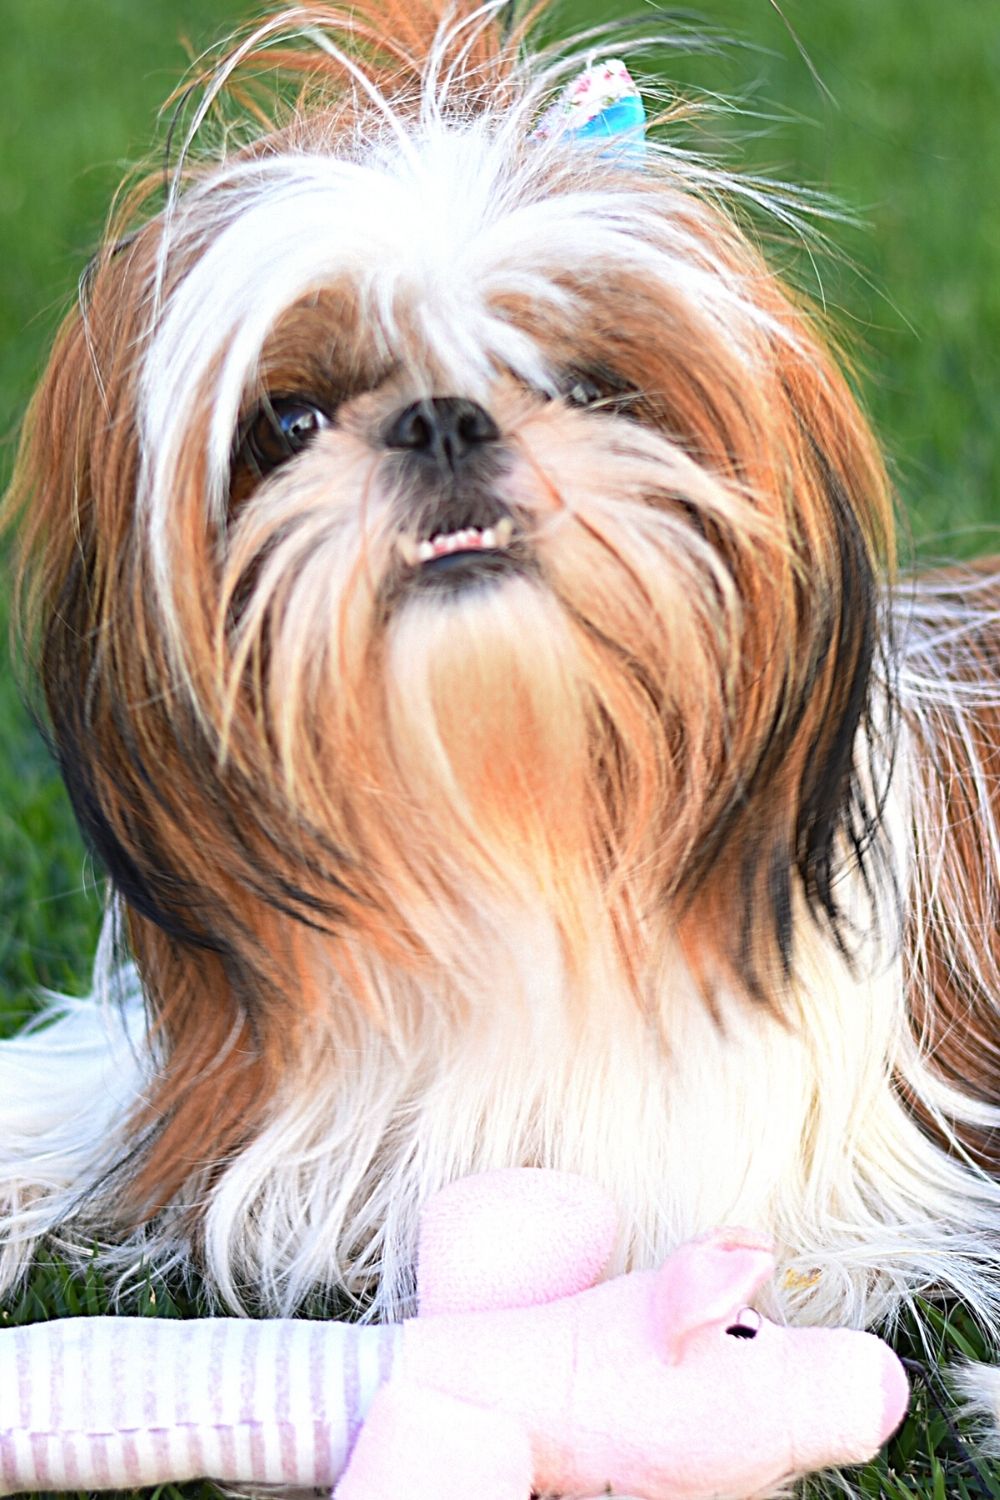 The Shih Tzu is another breed of dog that looks like the Ewoks of Star Wars